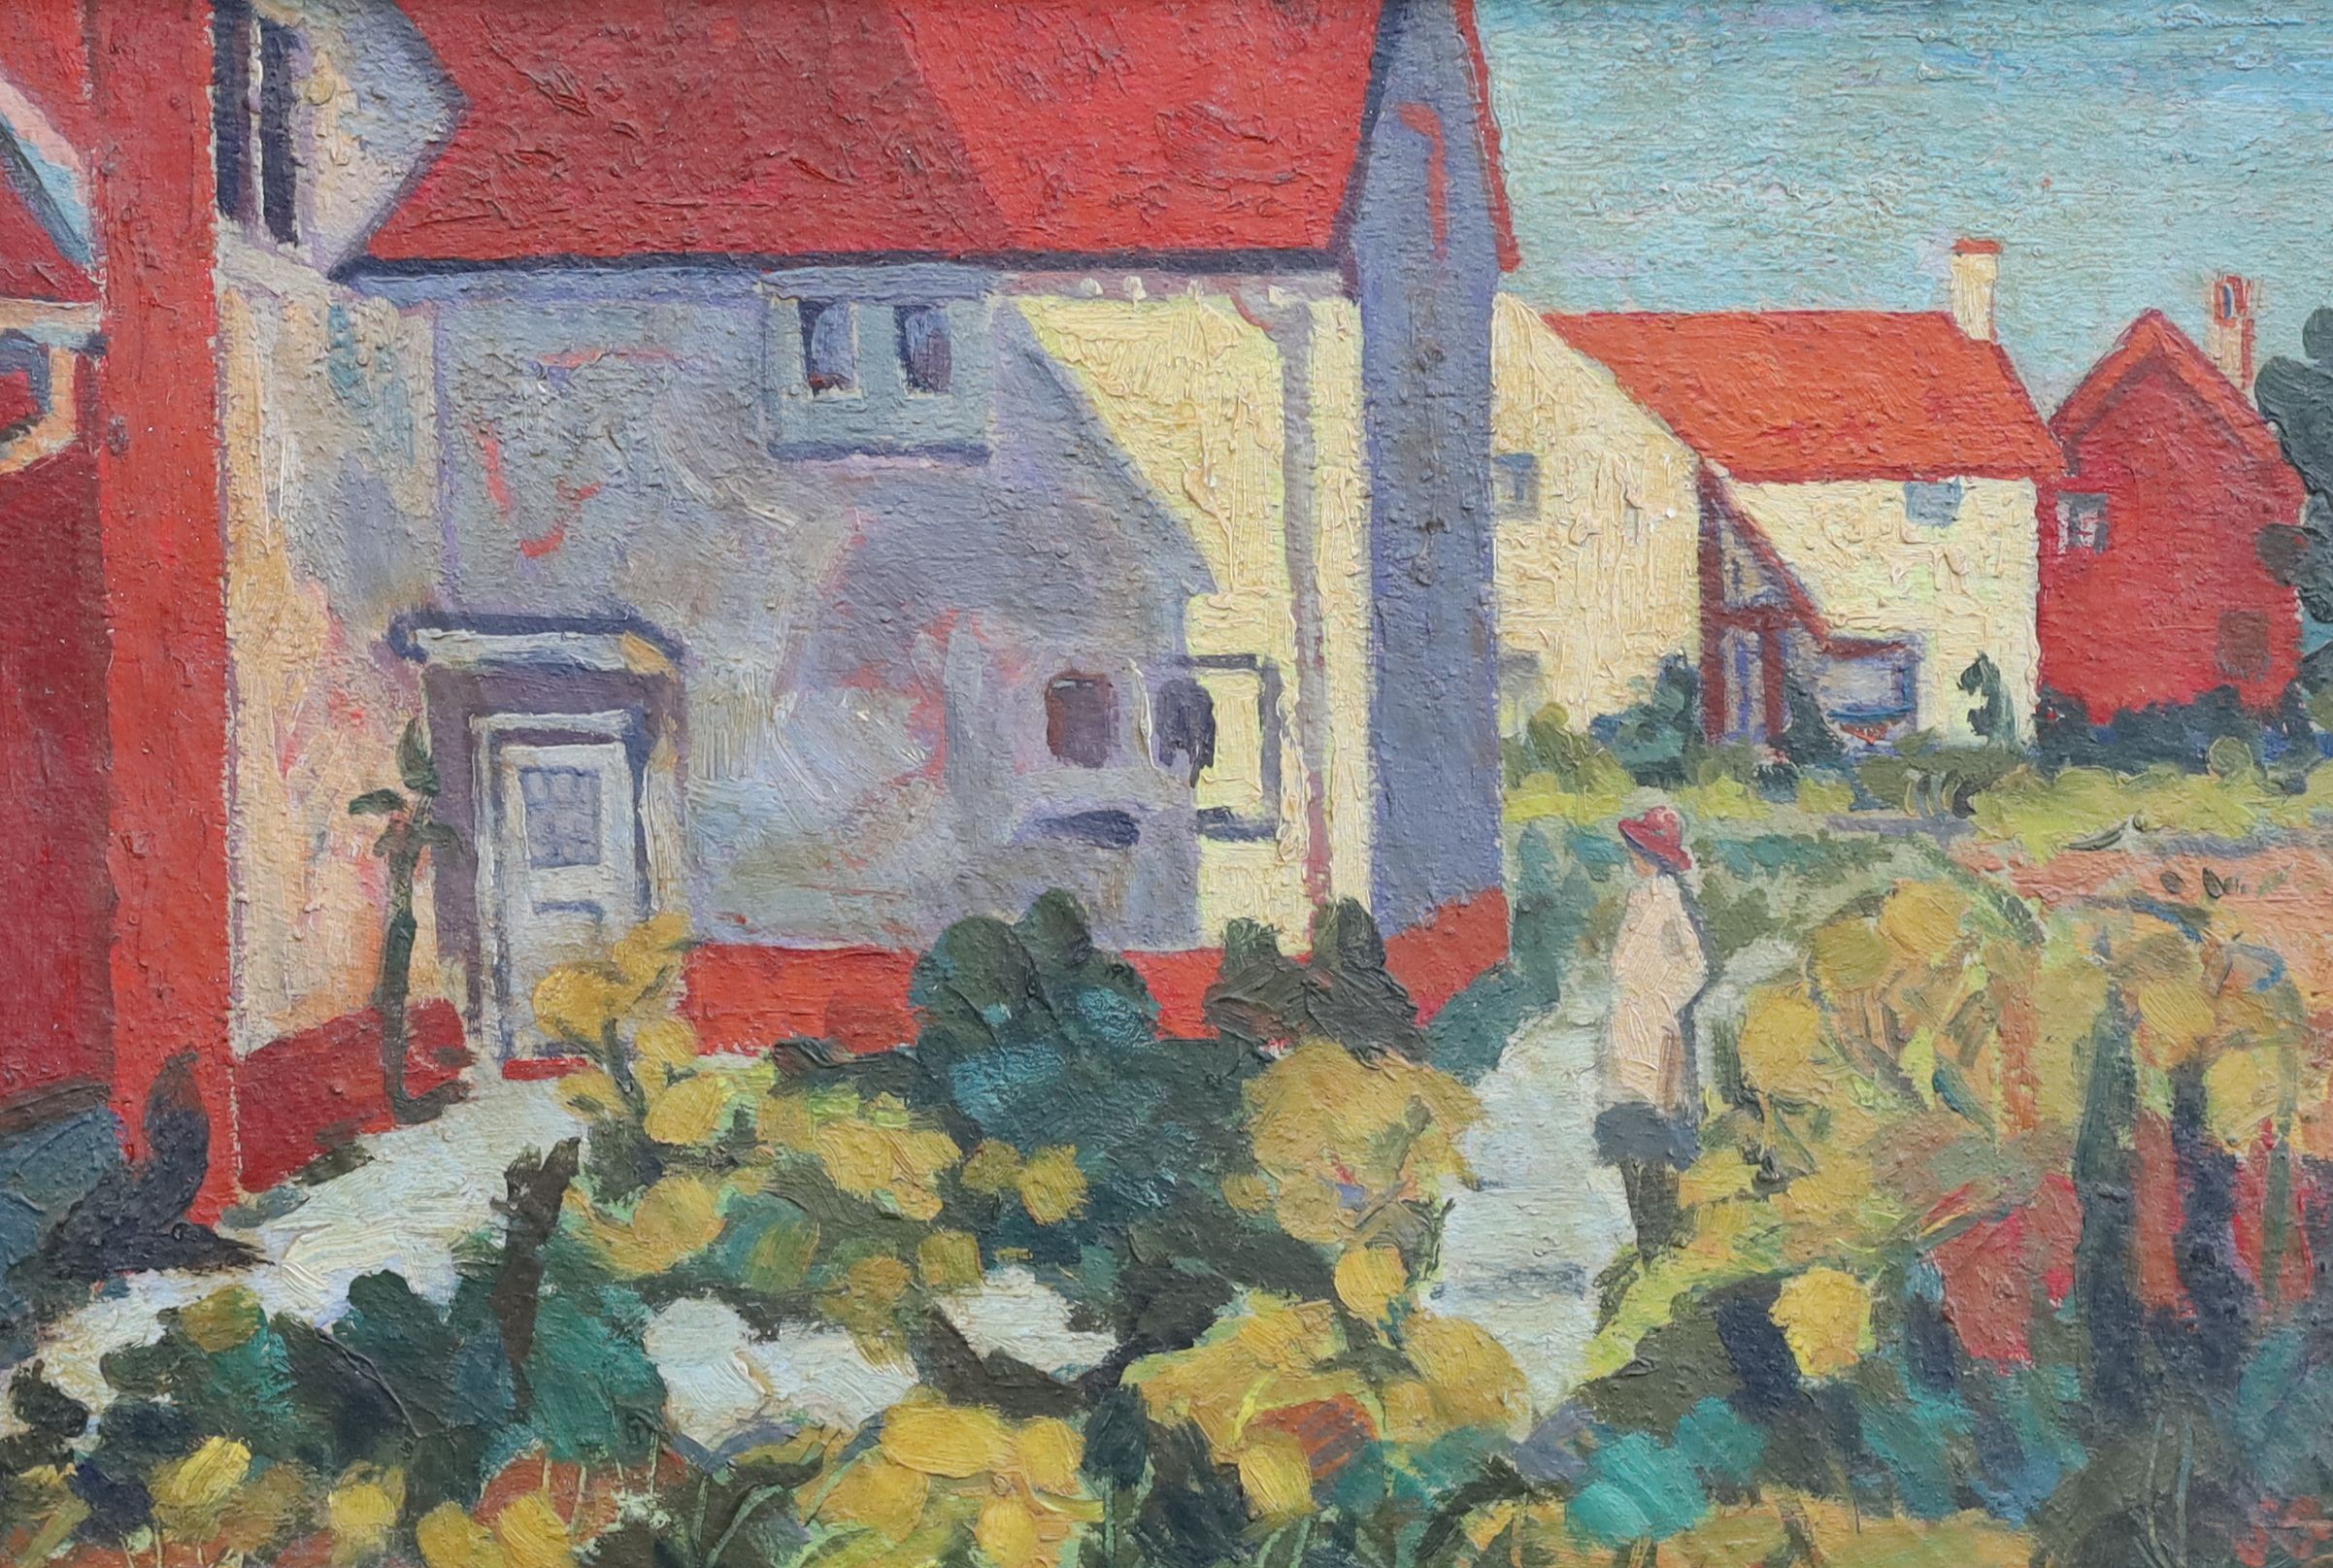 Spencer Frederick Gore (1878-1914), Study for a view of Harold Gilman’s house in Letchworth, oil on board, 27 x 40cm